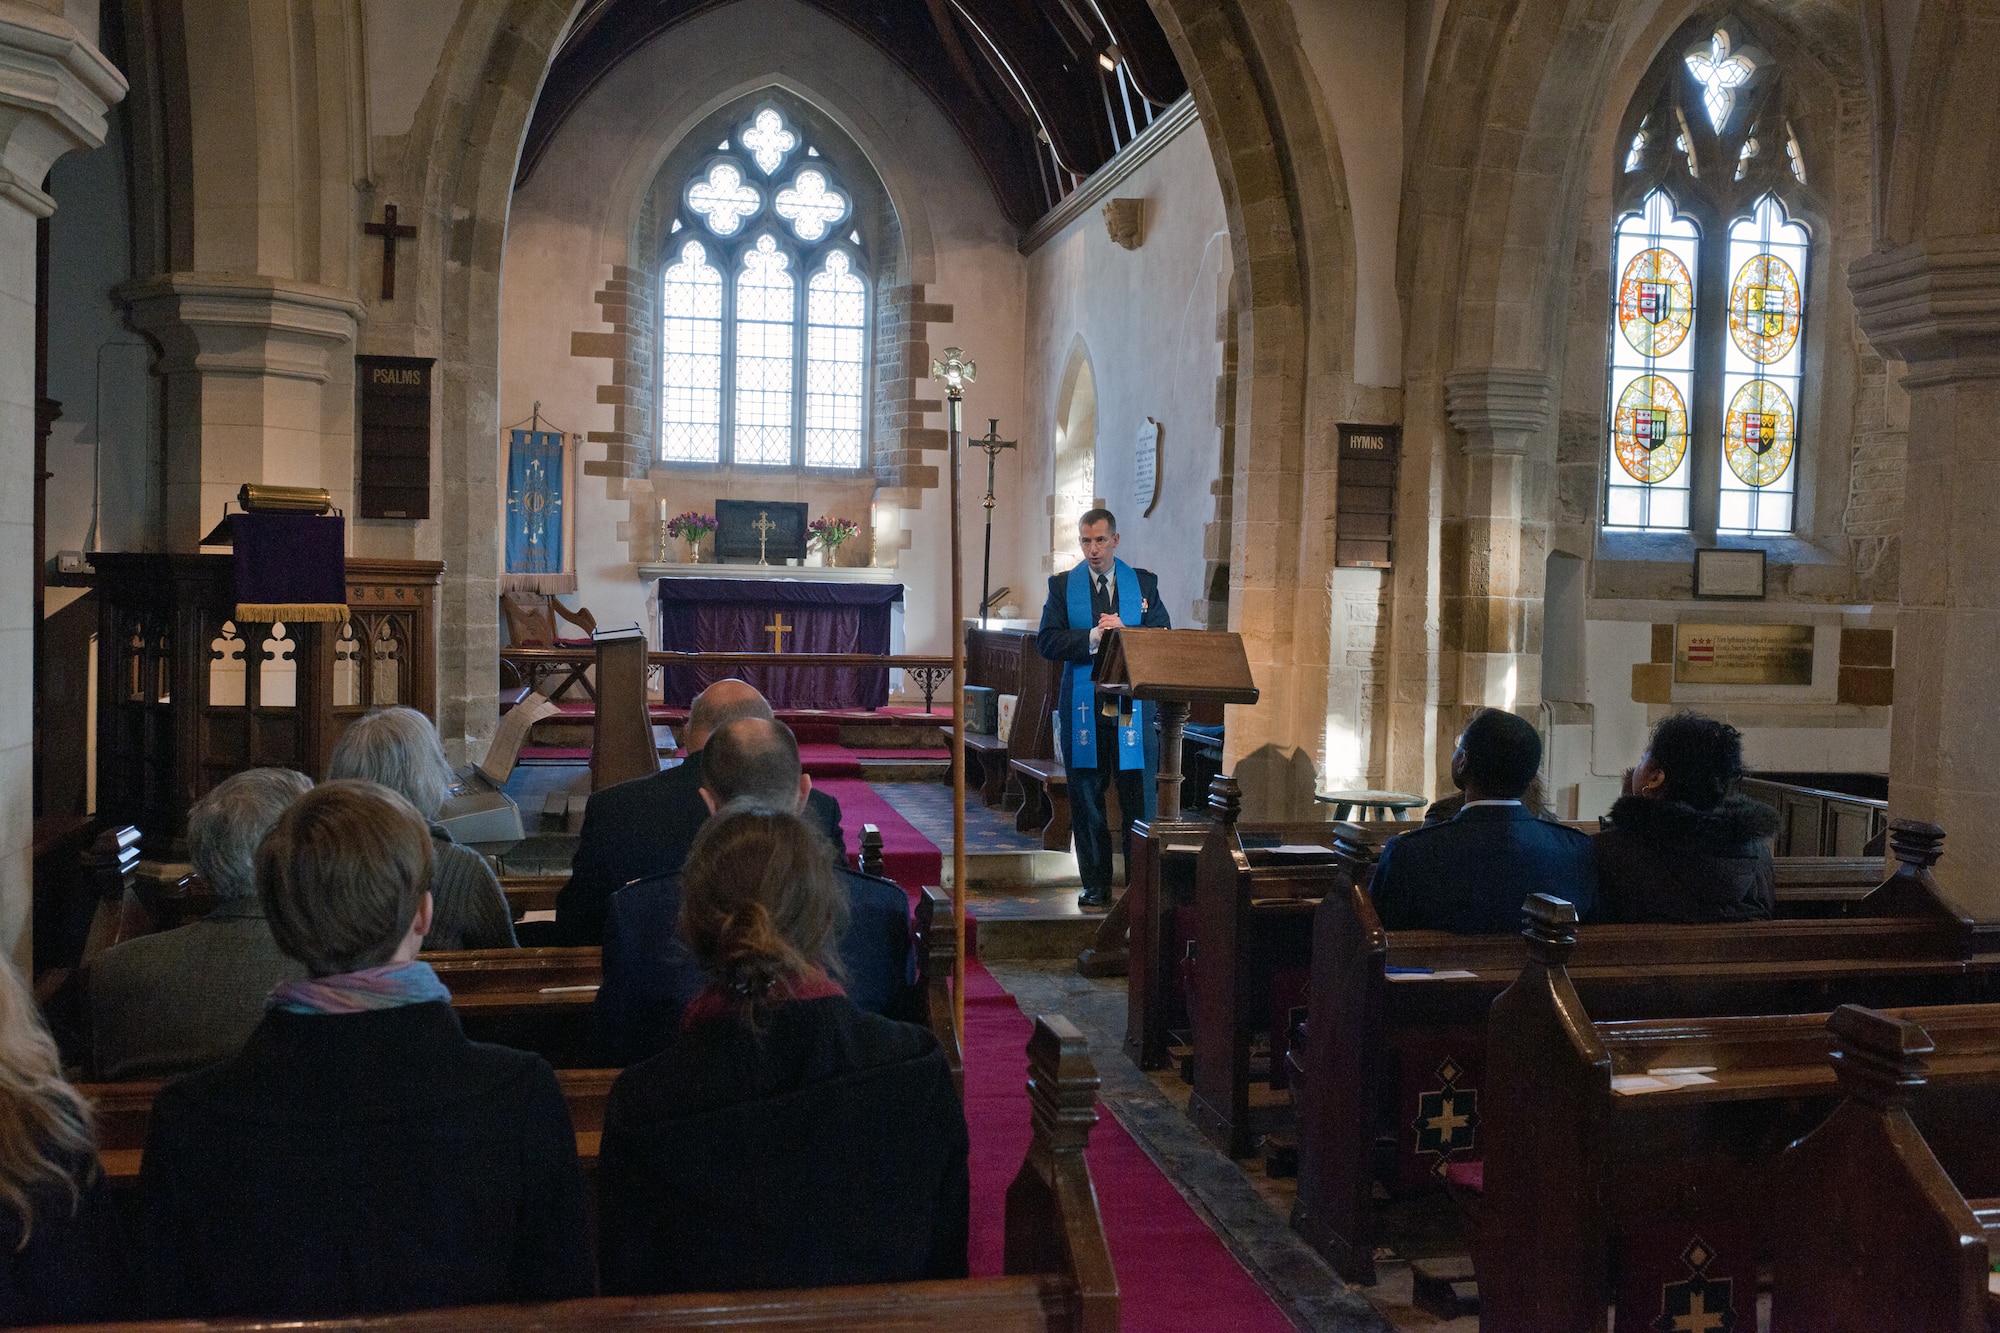 SULGRAVE, United Kingdom - Ch. (Maj.) Peter Fischer, 501st Combat Support Wing chaplain, gives a sermon at the parish church of St. James the Less in Sulgrave Feb. 17. The church dates from the 13th century, and has been designated by English Heritage as a Grade II listed building. To the left of Fischer is the pew where the Washington family worshipped on Sundays; the tomb of Lawrence Washington, George Washington’s five-time great grandfather; and a window bearing four stained-glass versions of the family coat of arms. (U.S. Air Force photo by Staff Sgt. Brian Stives)